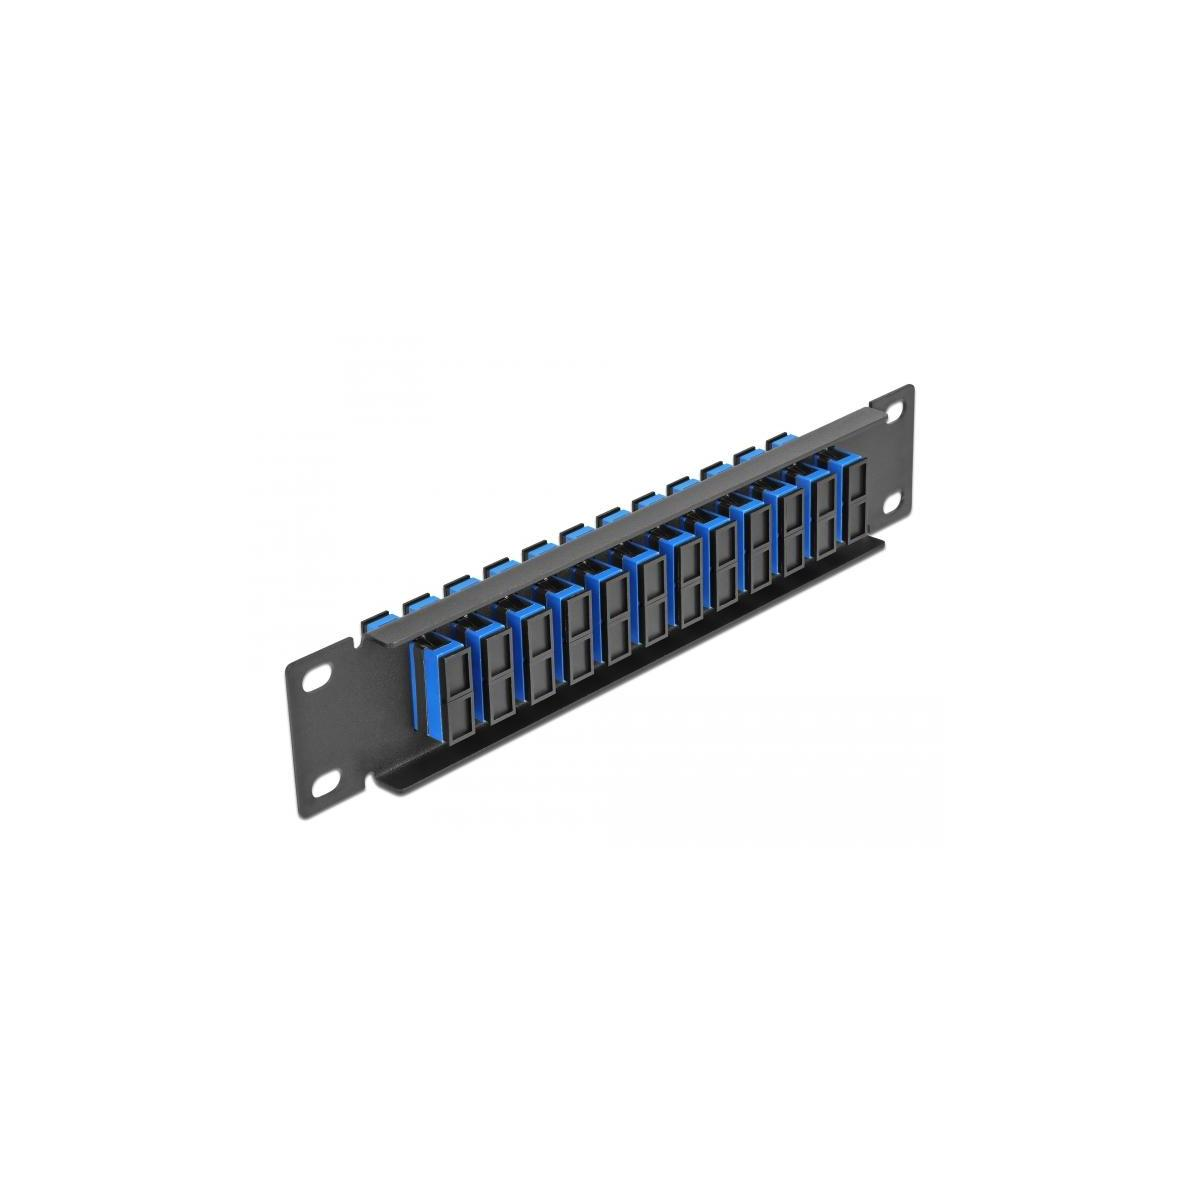 DELOCK 66771 Patchpanel